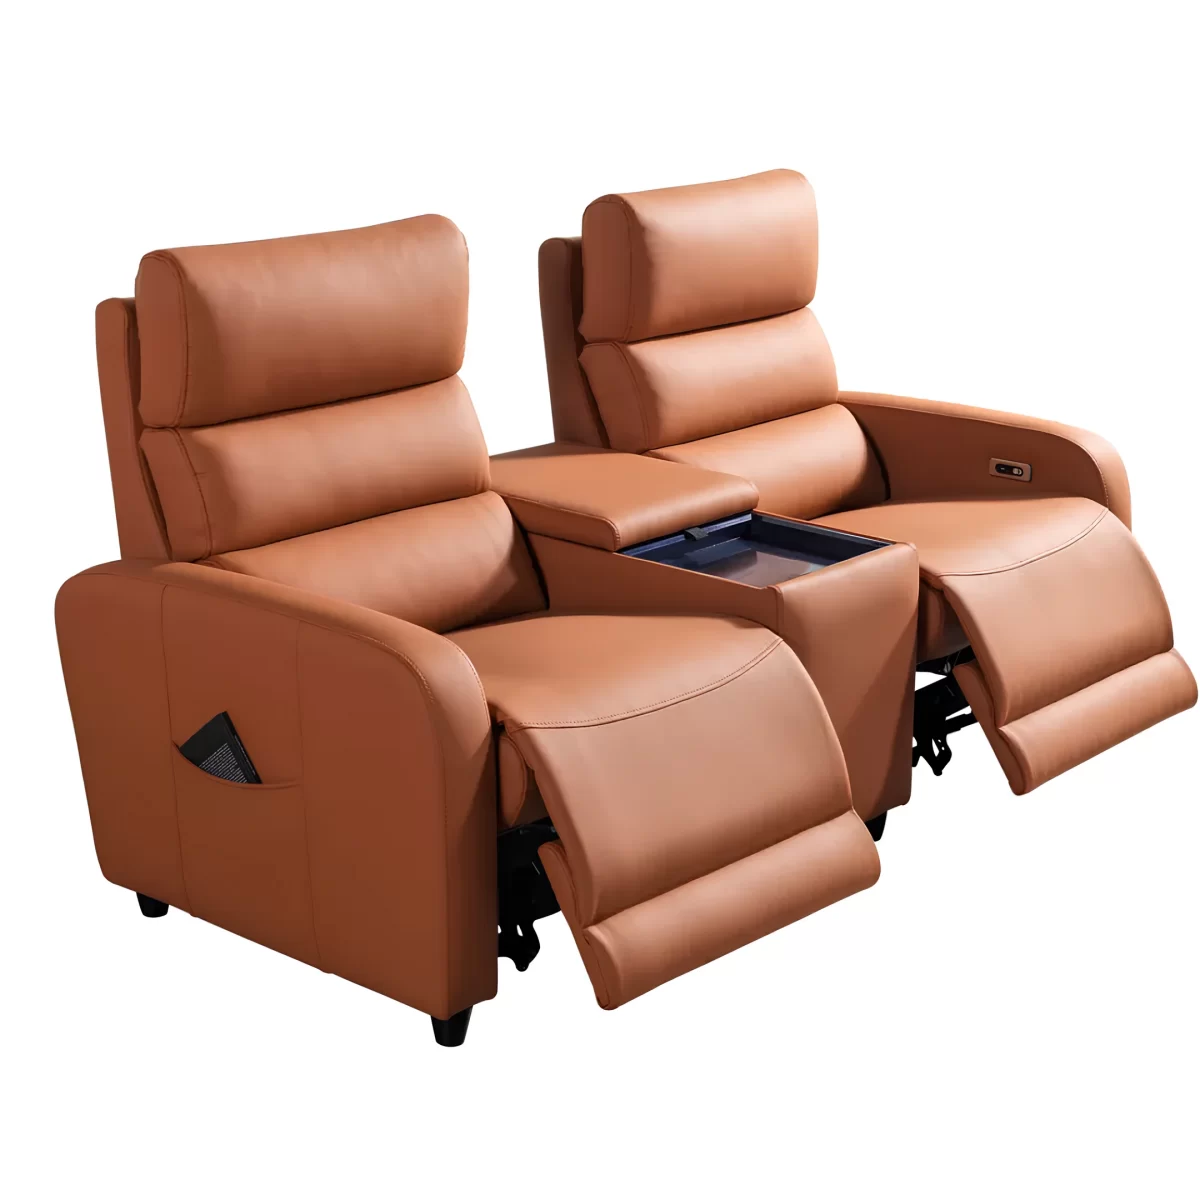 mari double reclining sofa electric recliner seat for home theater2